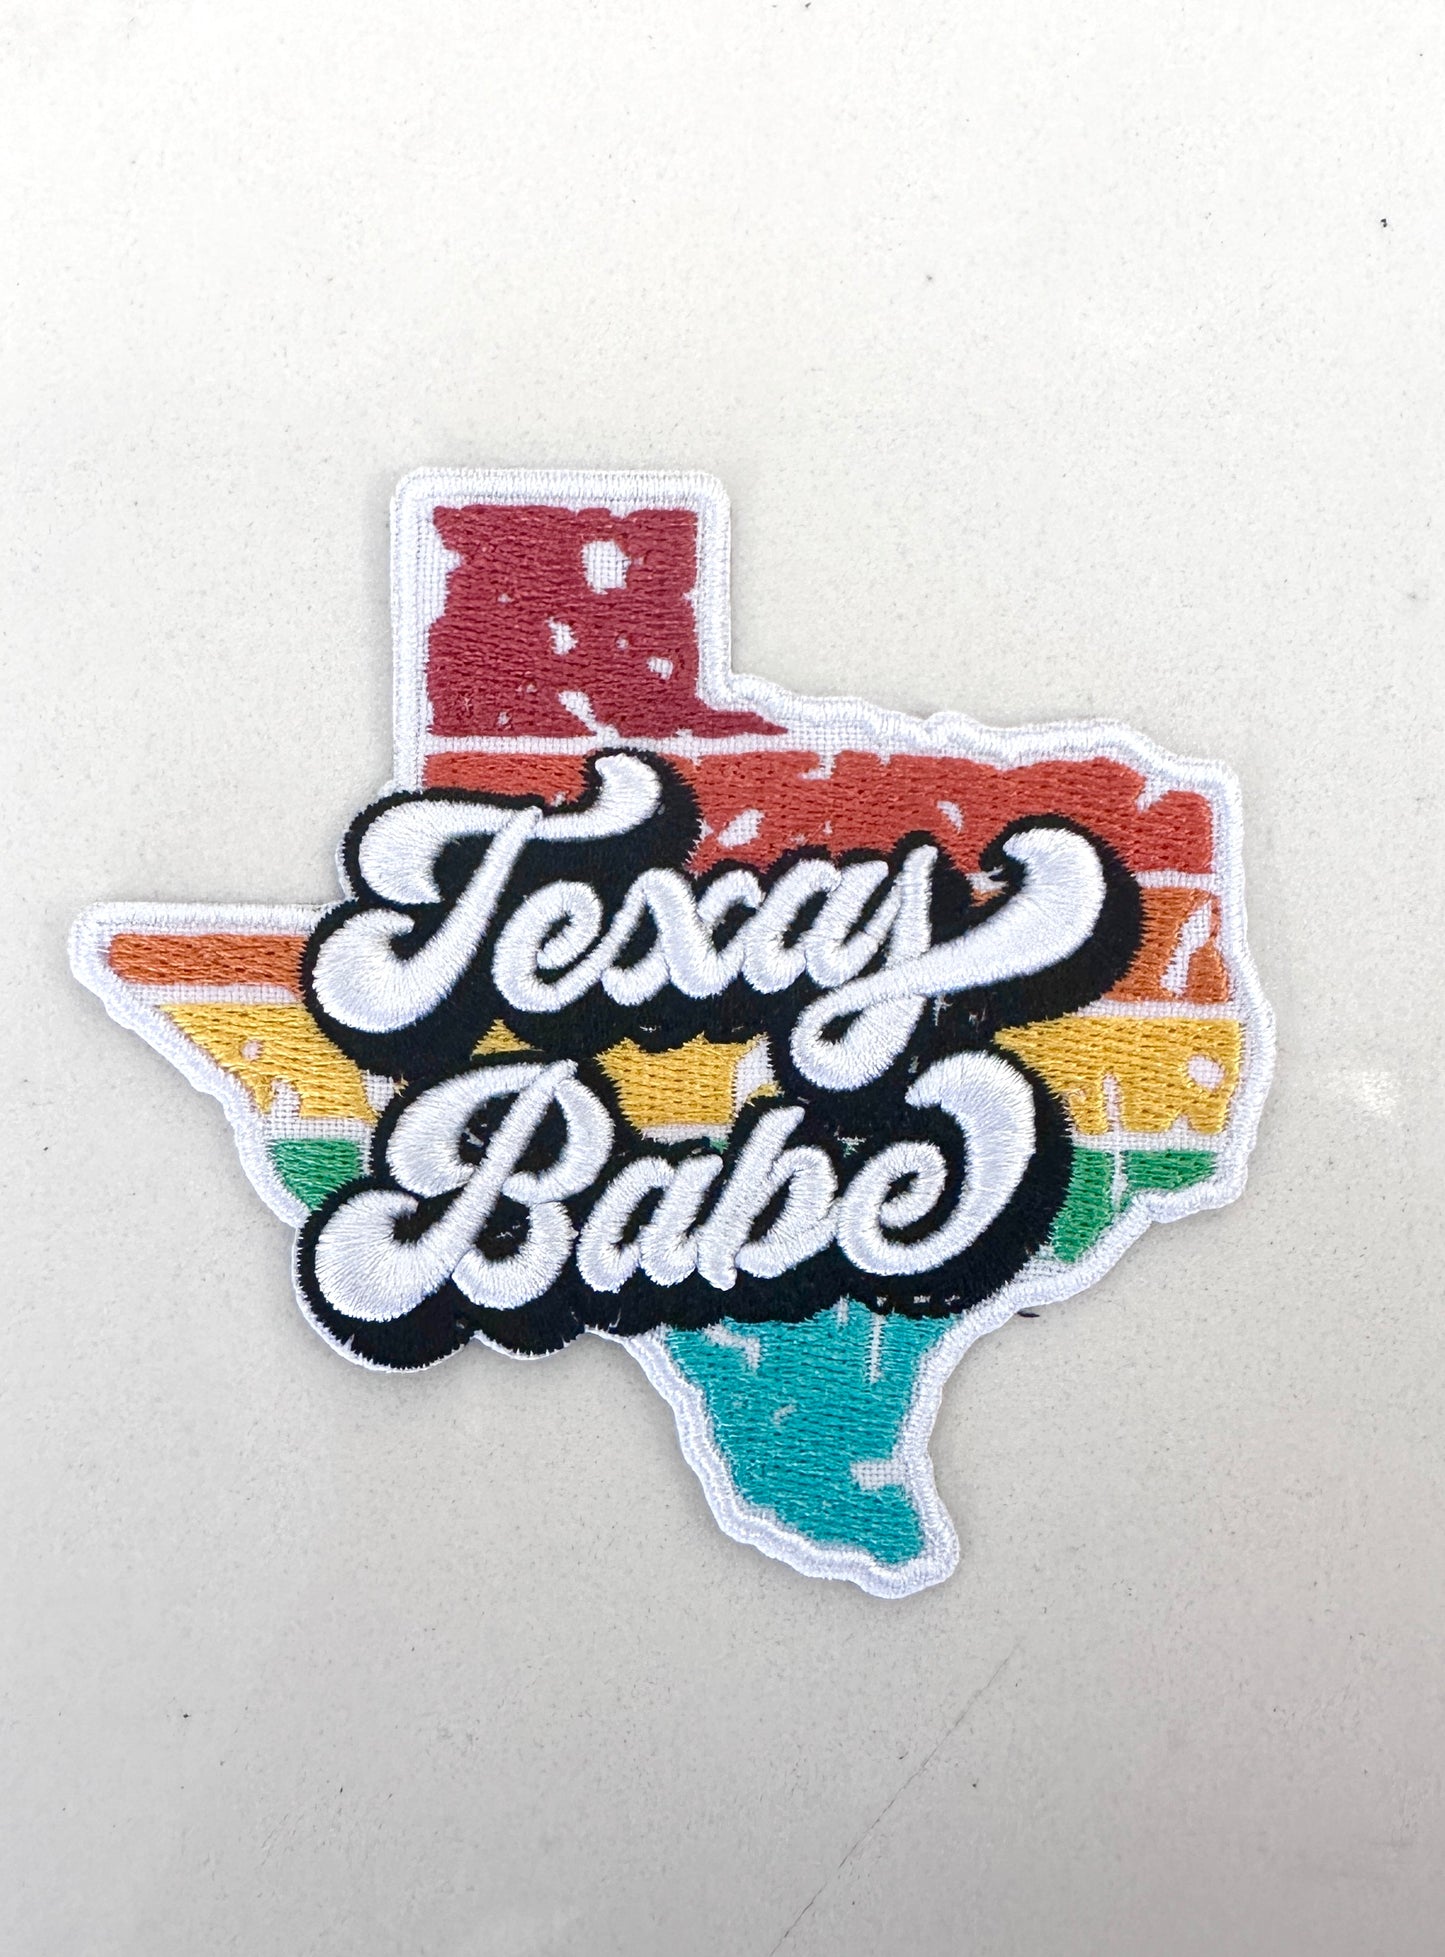 Sweet Texas Patches [6 Styles]